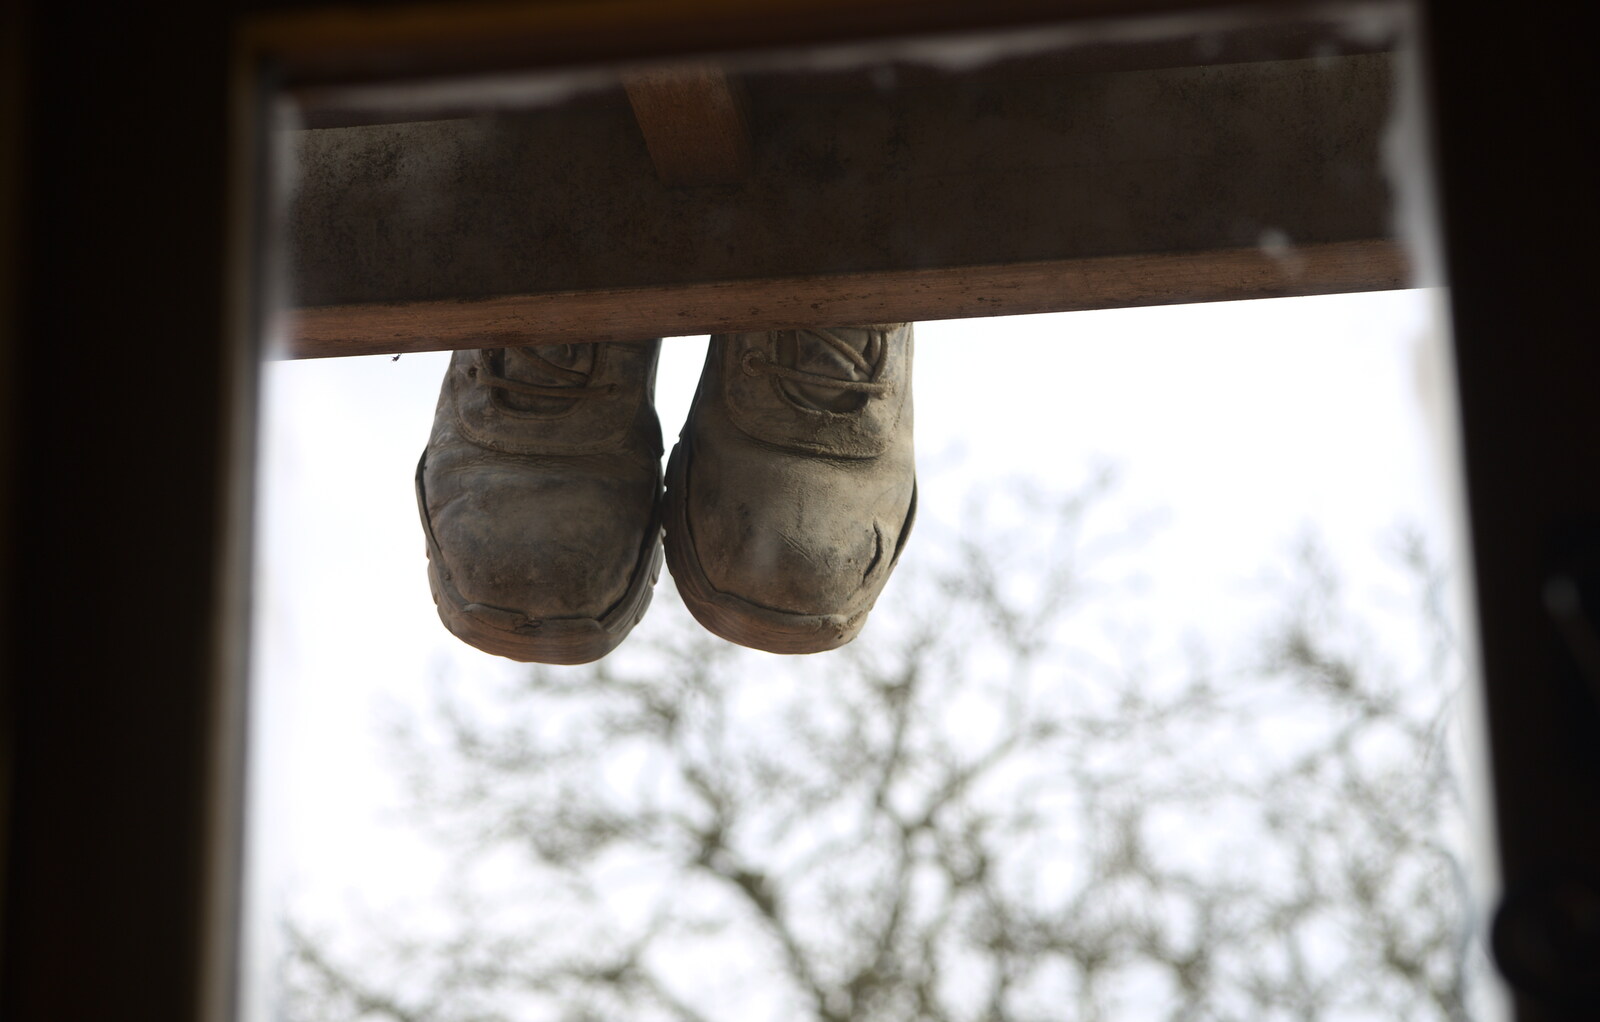 Builder's boots appear outside a window from Emily Comes to Visit, Brome, Suffolk - 15th March 2014